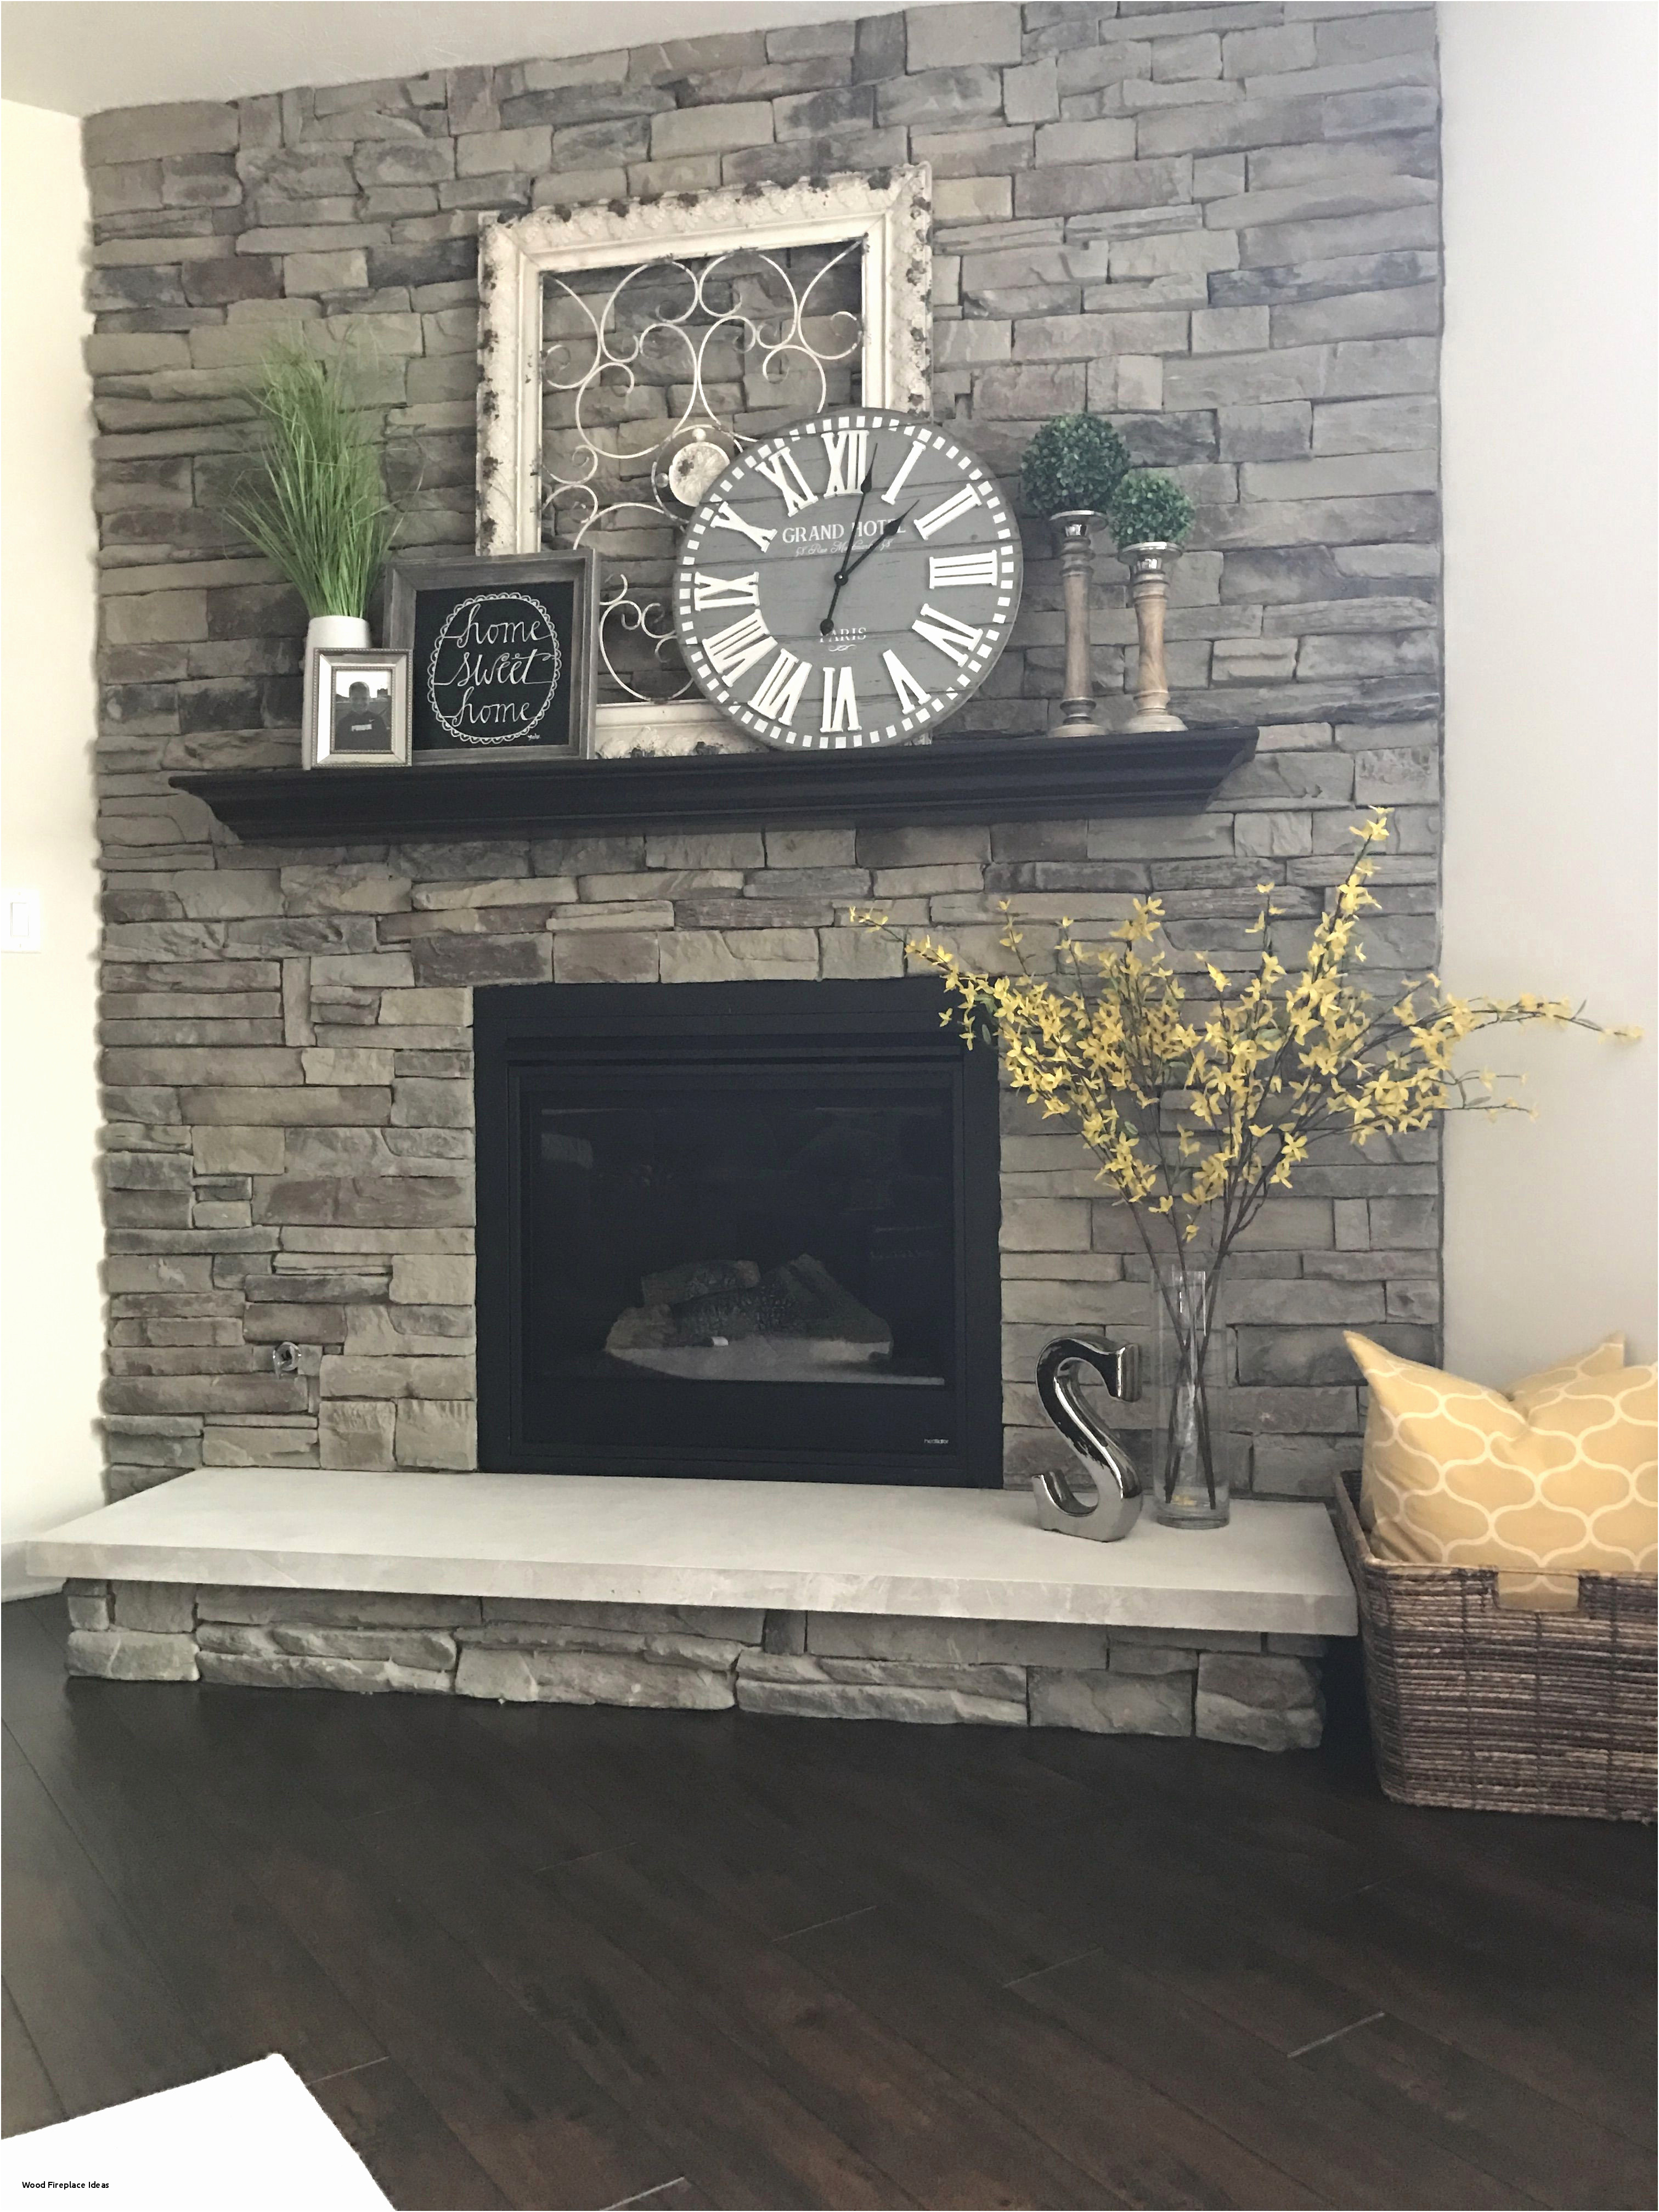 Best Of Images Of Fireplace